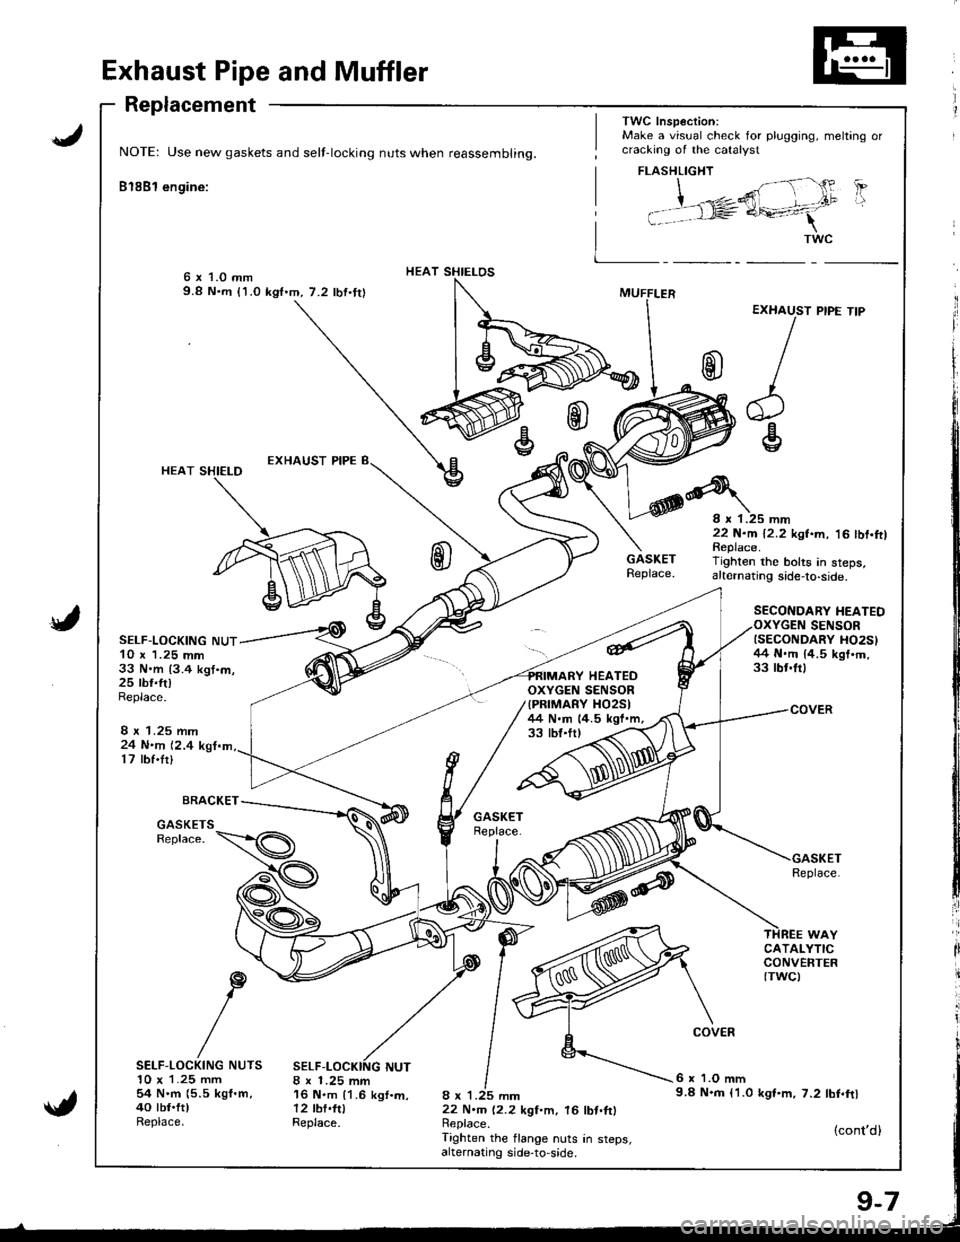 HONDA INTEGRA 1998 4.G Workshop Manual J
Exhaust Pipe and Muffler
Replacement
NOTE: Use new gaskets and self-locking nuts when reassembling.
Bl8Bl engine:
HEAT SHIELOS6 x 1.0 mm9.8 N.m (1.0 kgf.m,7.2 lbf.tr)
{
HEAT SHIELD
SELF-LOCKING NUT1